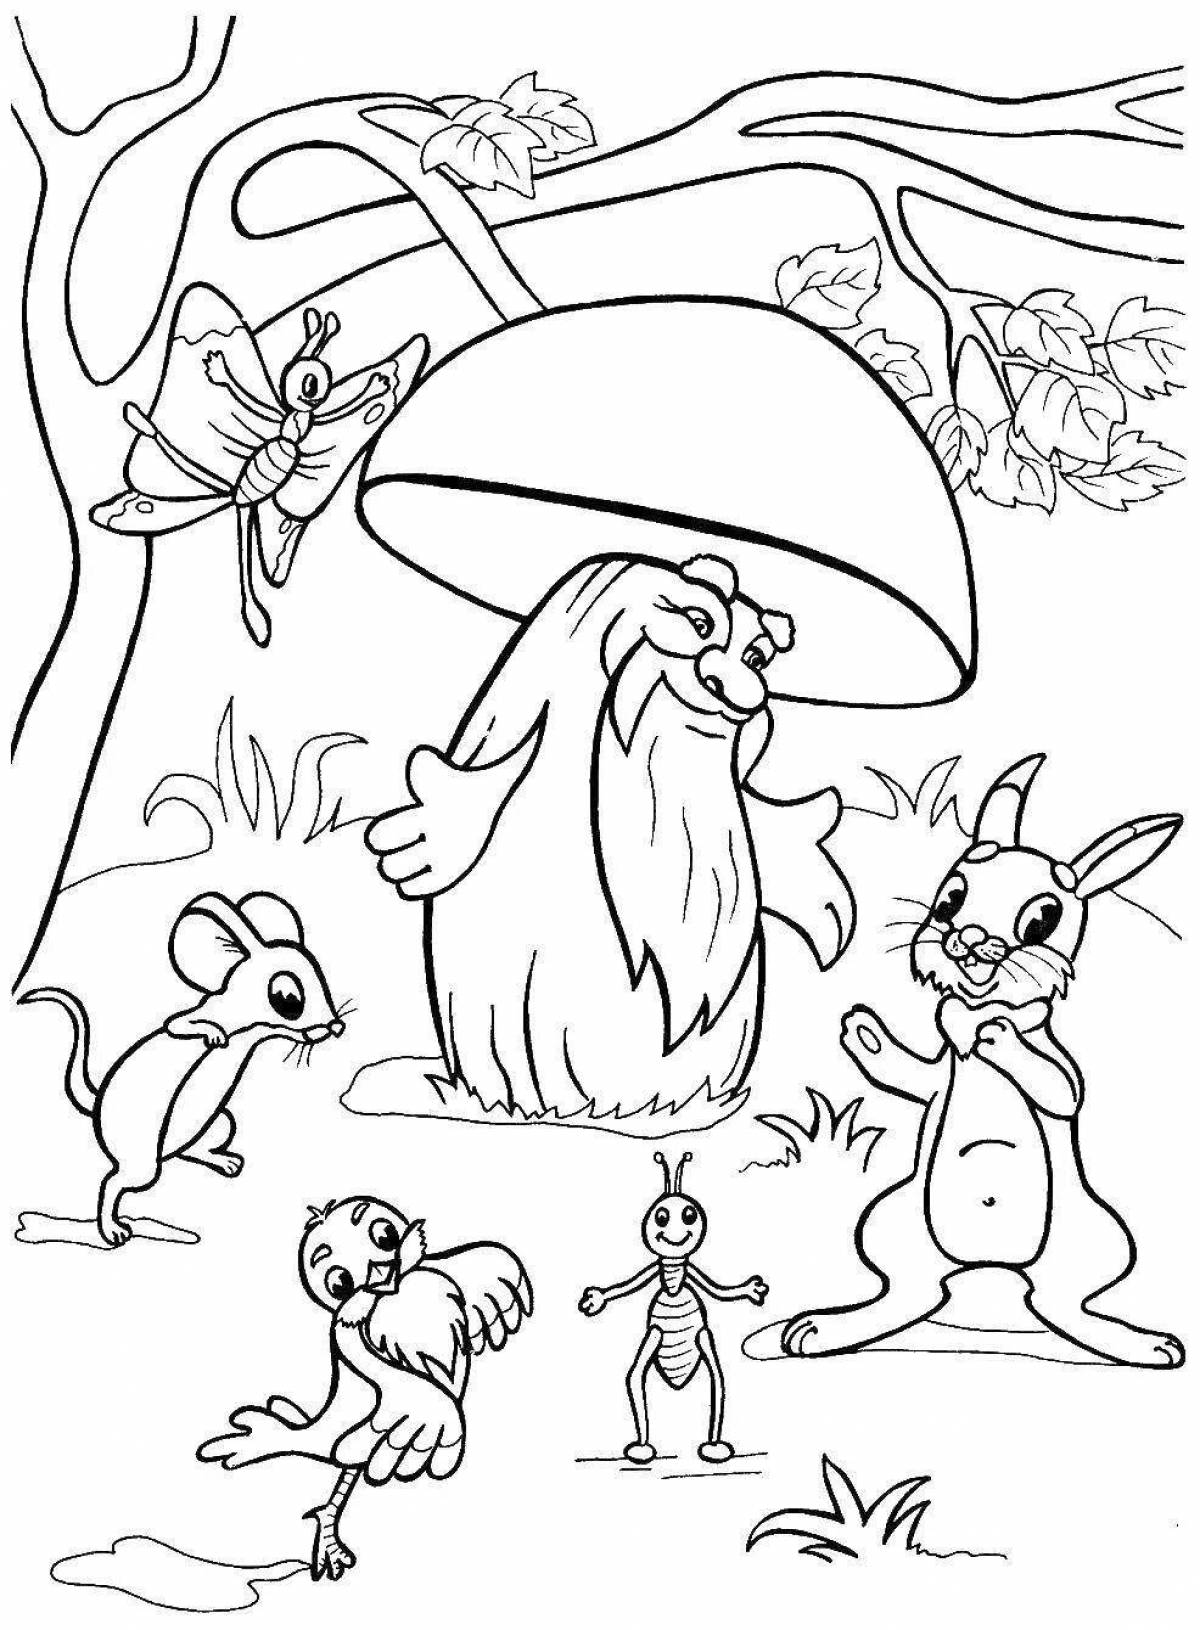 Live coloring fairy tale under the mushroom